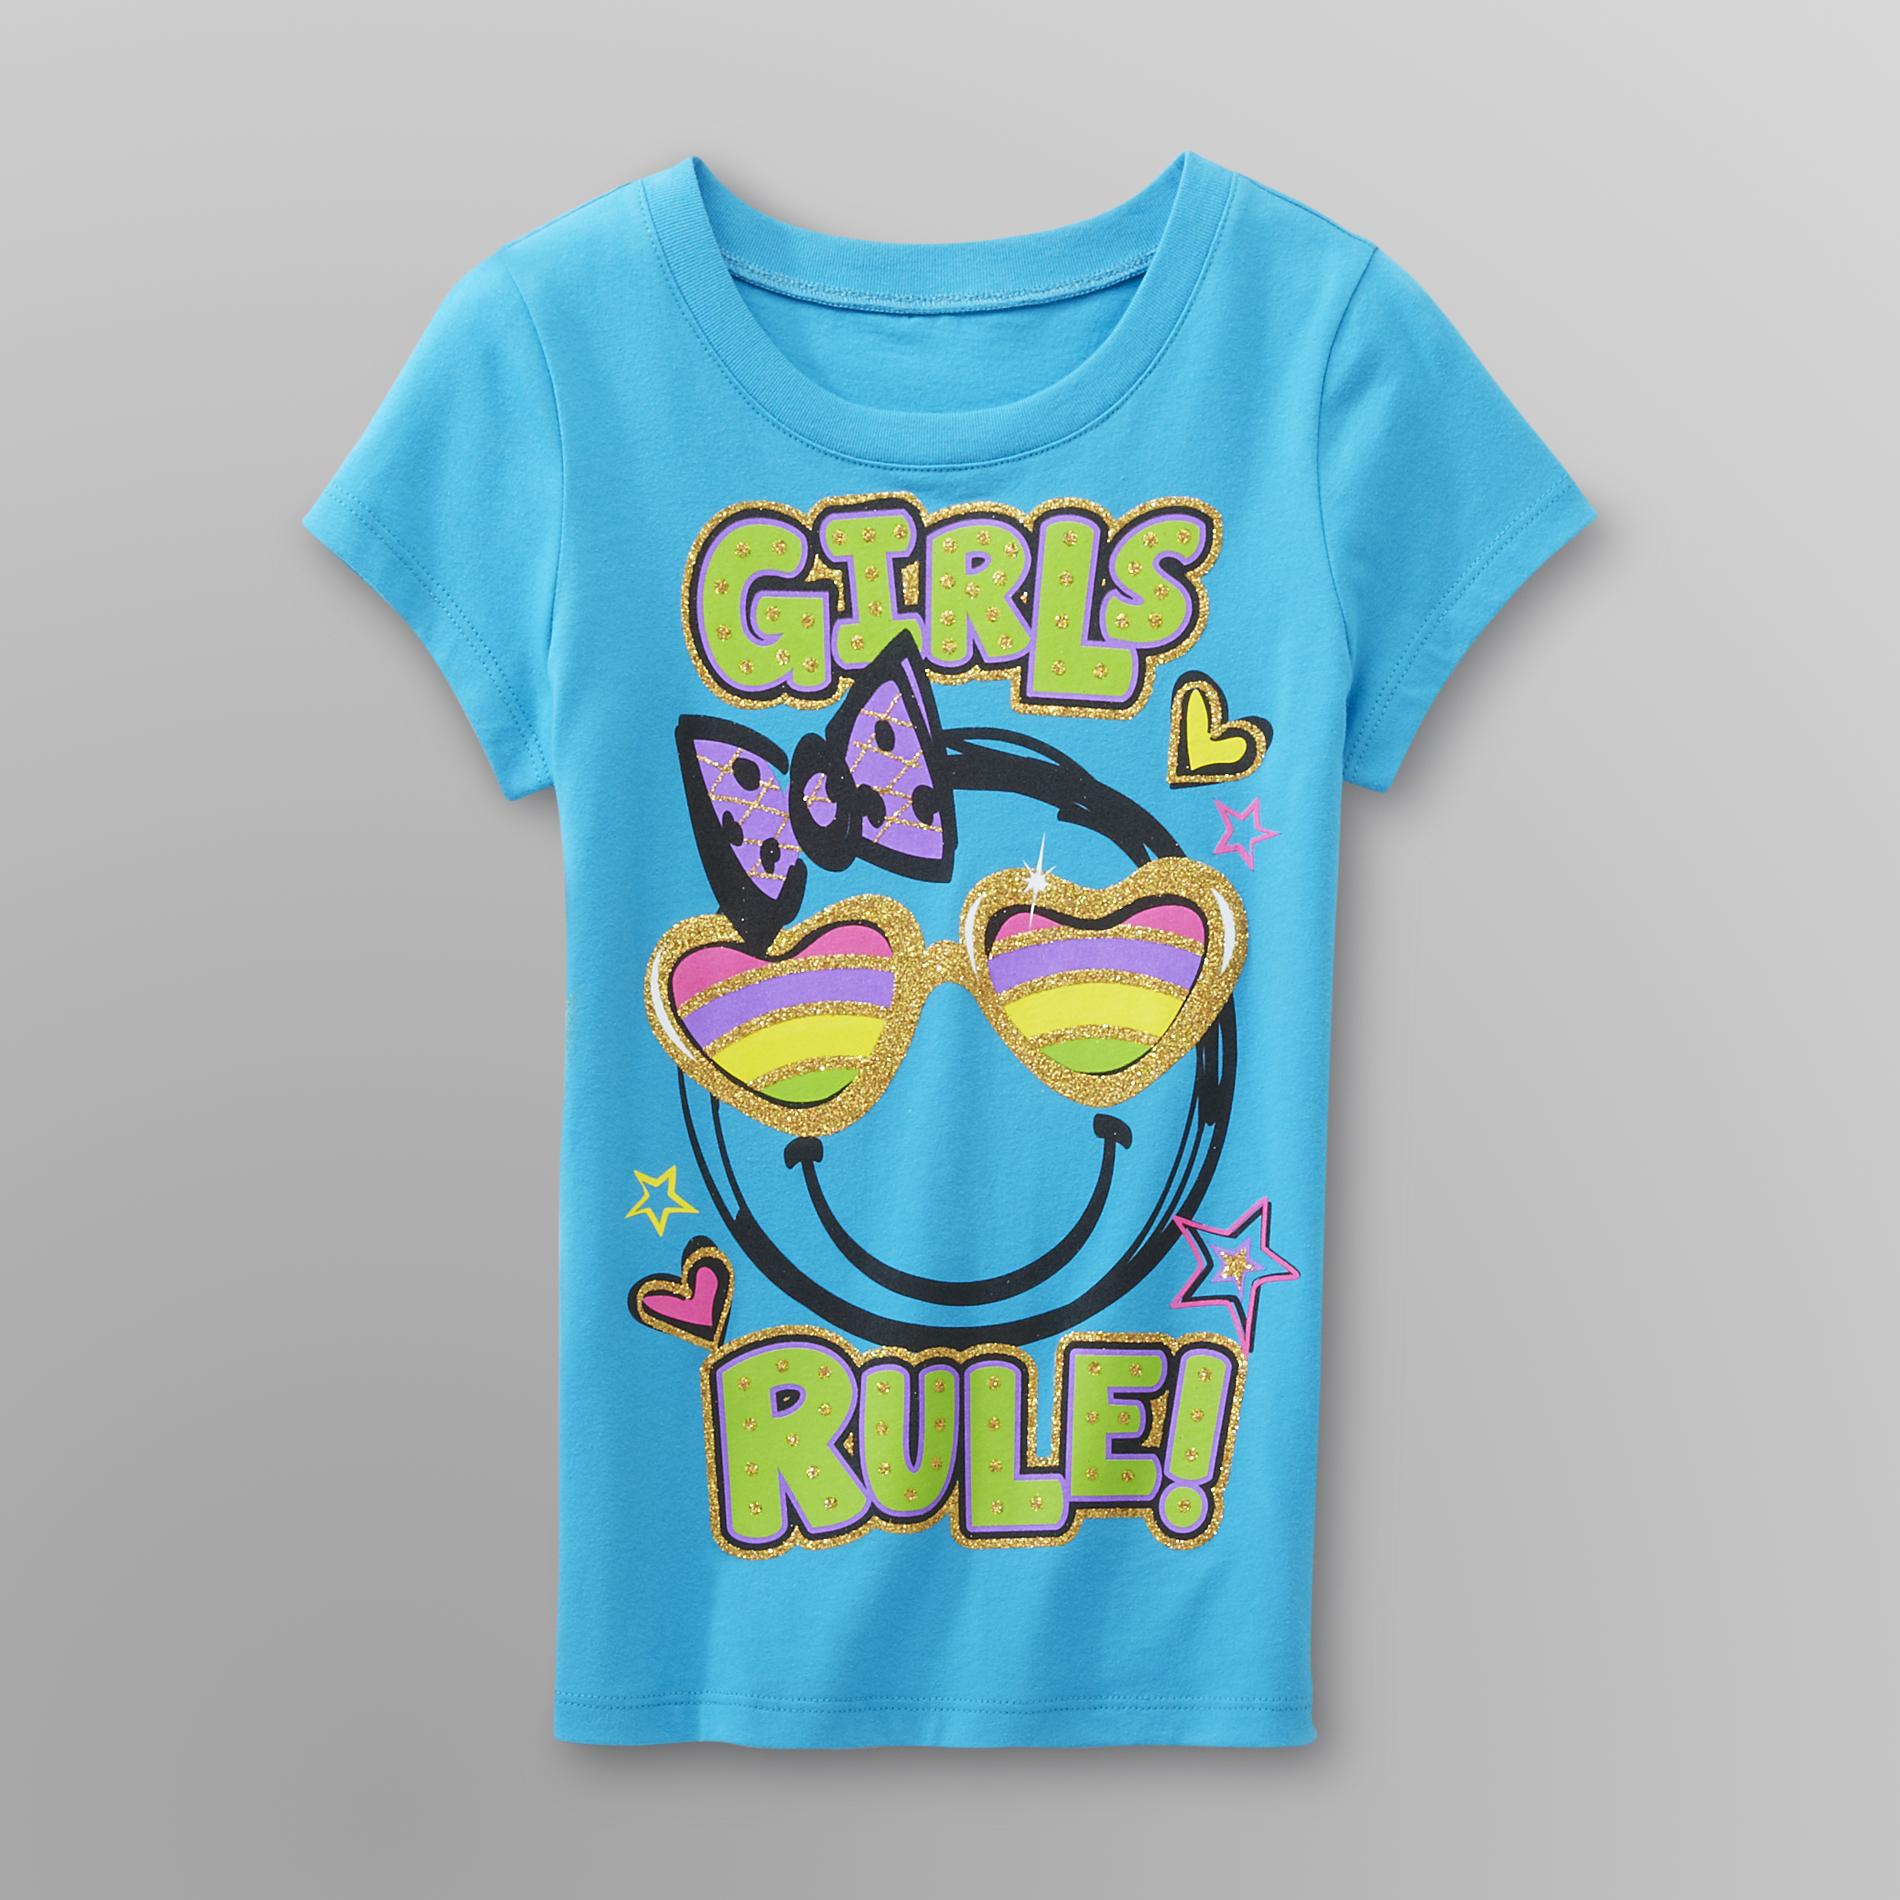 Route 66 Girl's Graphic T-Shirt - Girls Rule